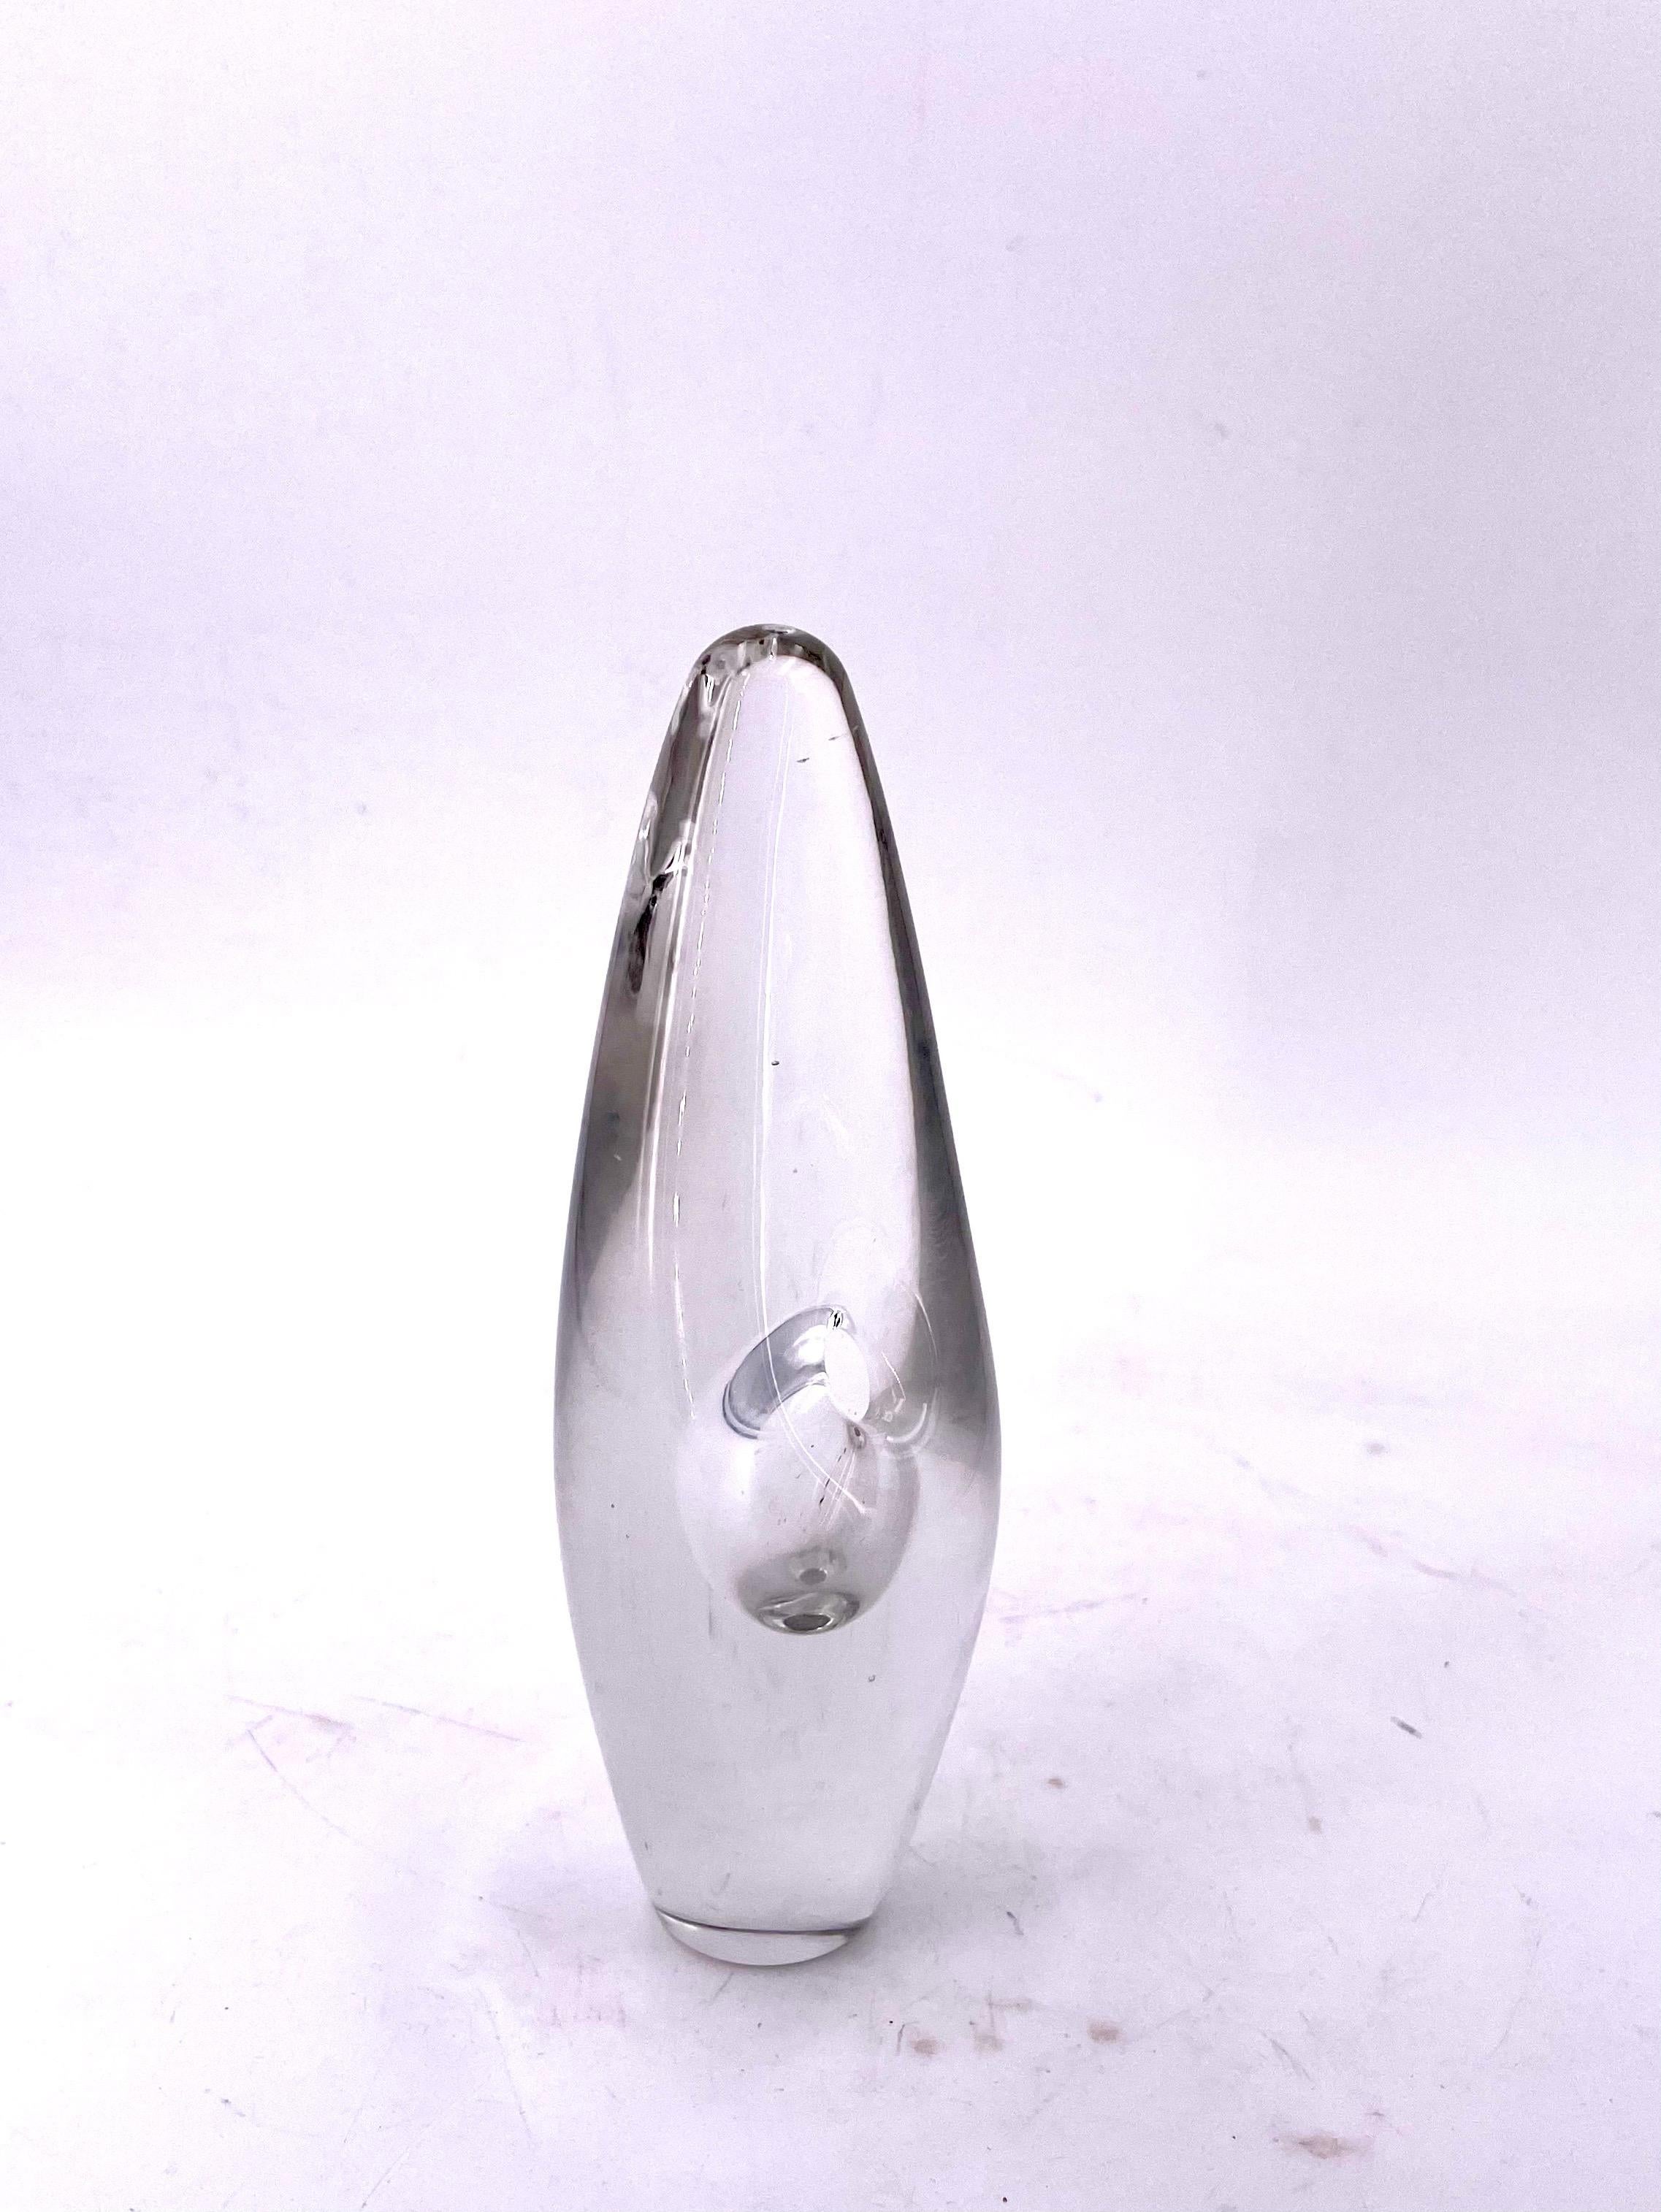 'Orkidea' glass sculpture vase by Timo Sarpaneva for Iittala. Clear lead crystal glass, steam blown, cut and surface polished. Designed in 1953. Signed. Rare size great condition no chips or cracks.
 